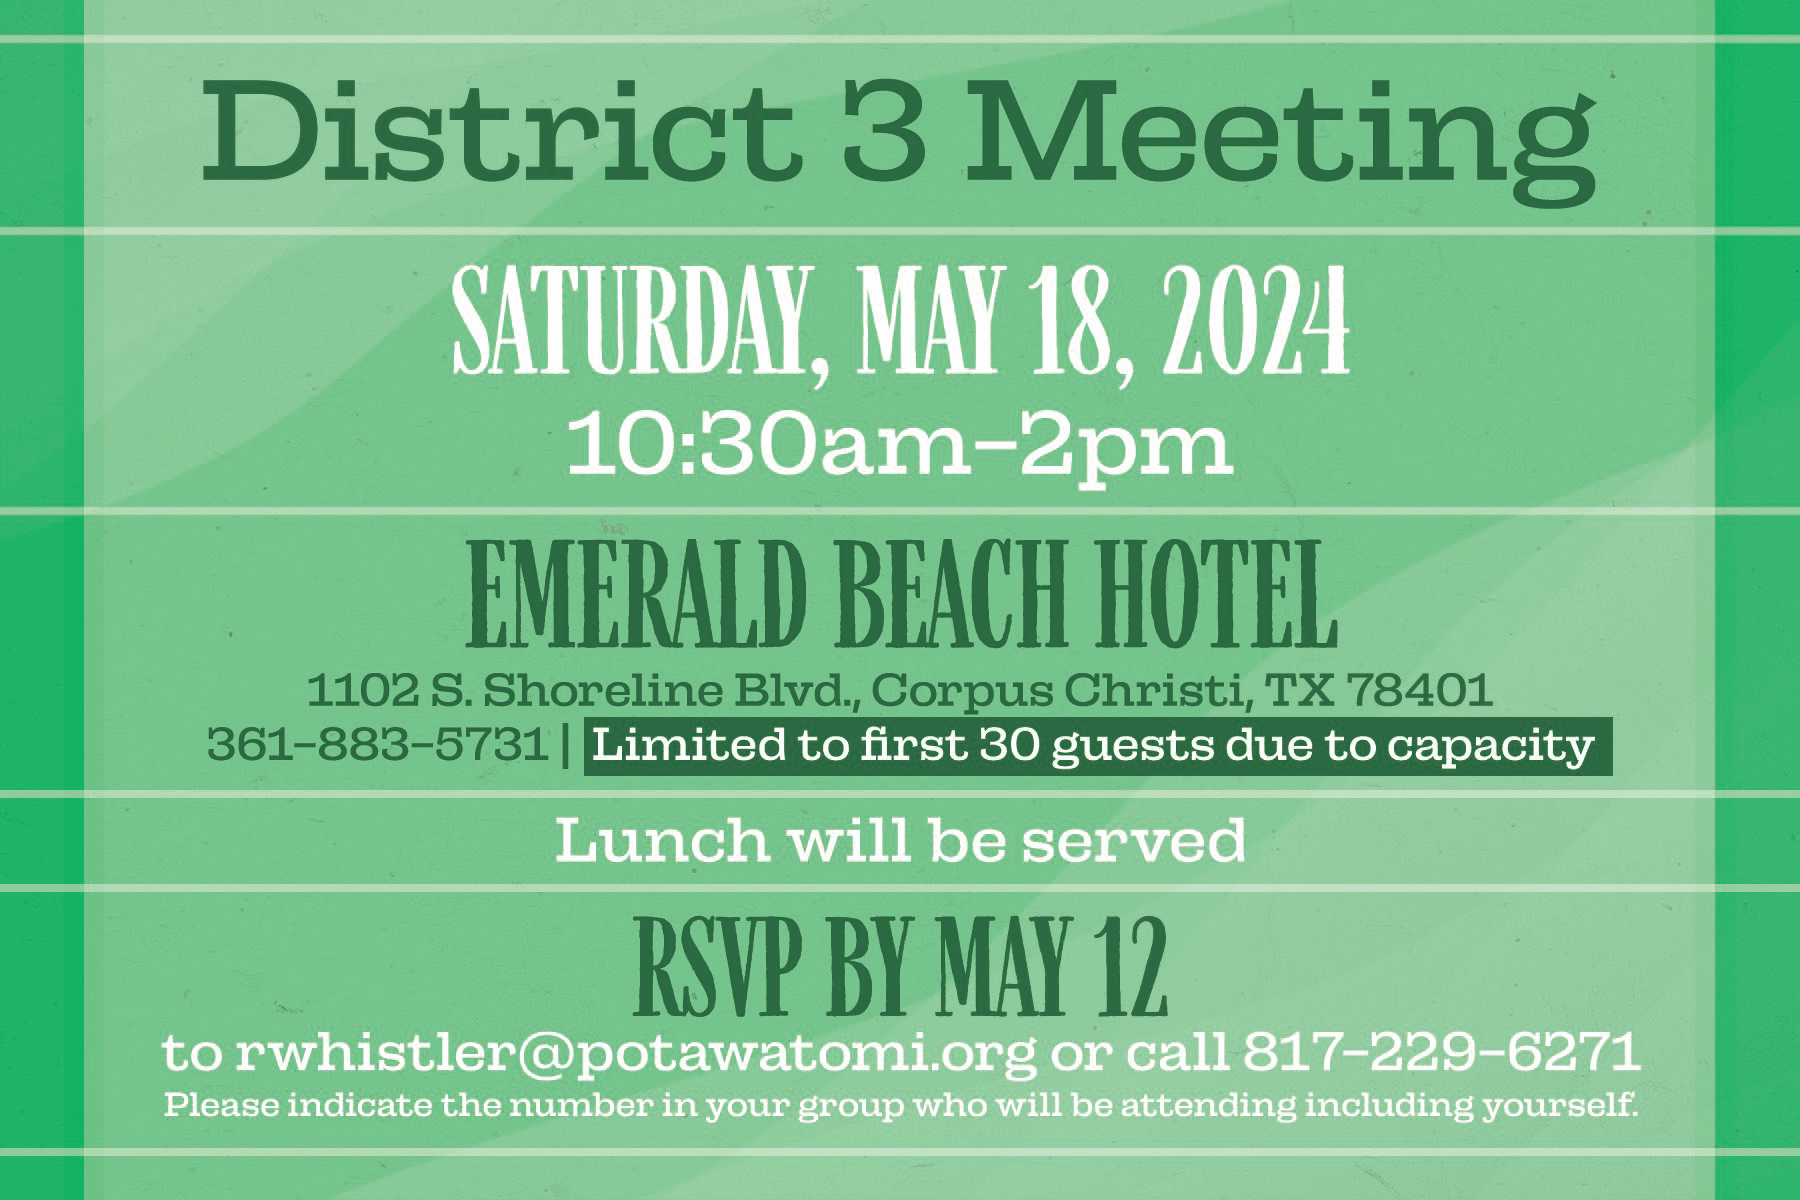 Green background with plaid stripes and white and green text inviting CPN members to a District 3 meeting on May 18, 2024.